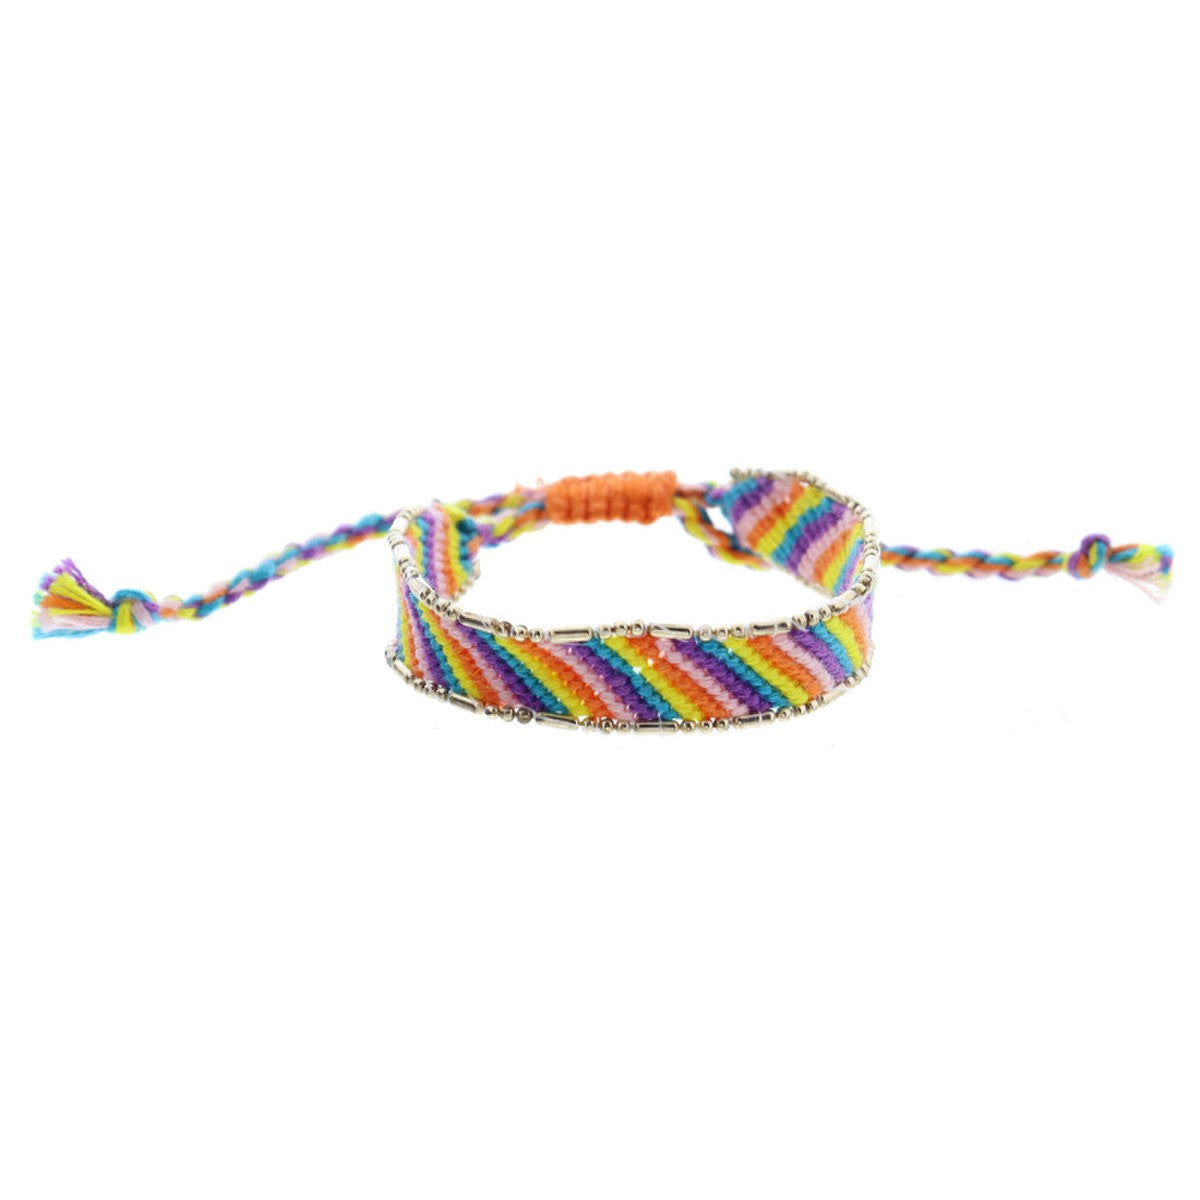 Jane Marie Kids Multi Rainbow Striped Woven Band With Gold Accent Edge Bracelet-JANE MARIE-Little Giant Kidz